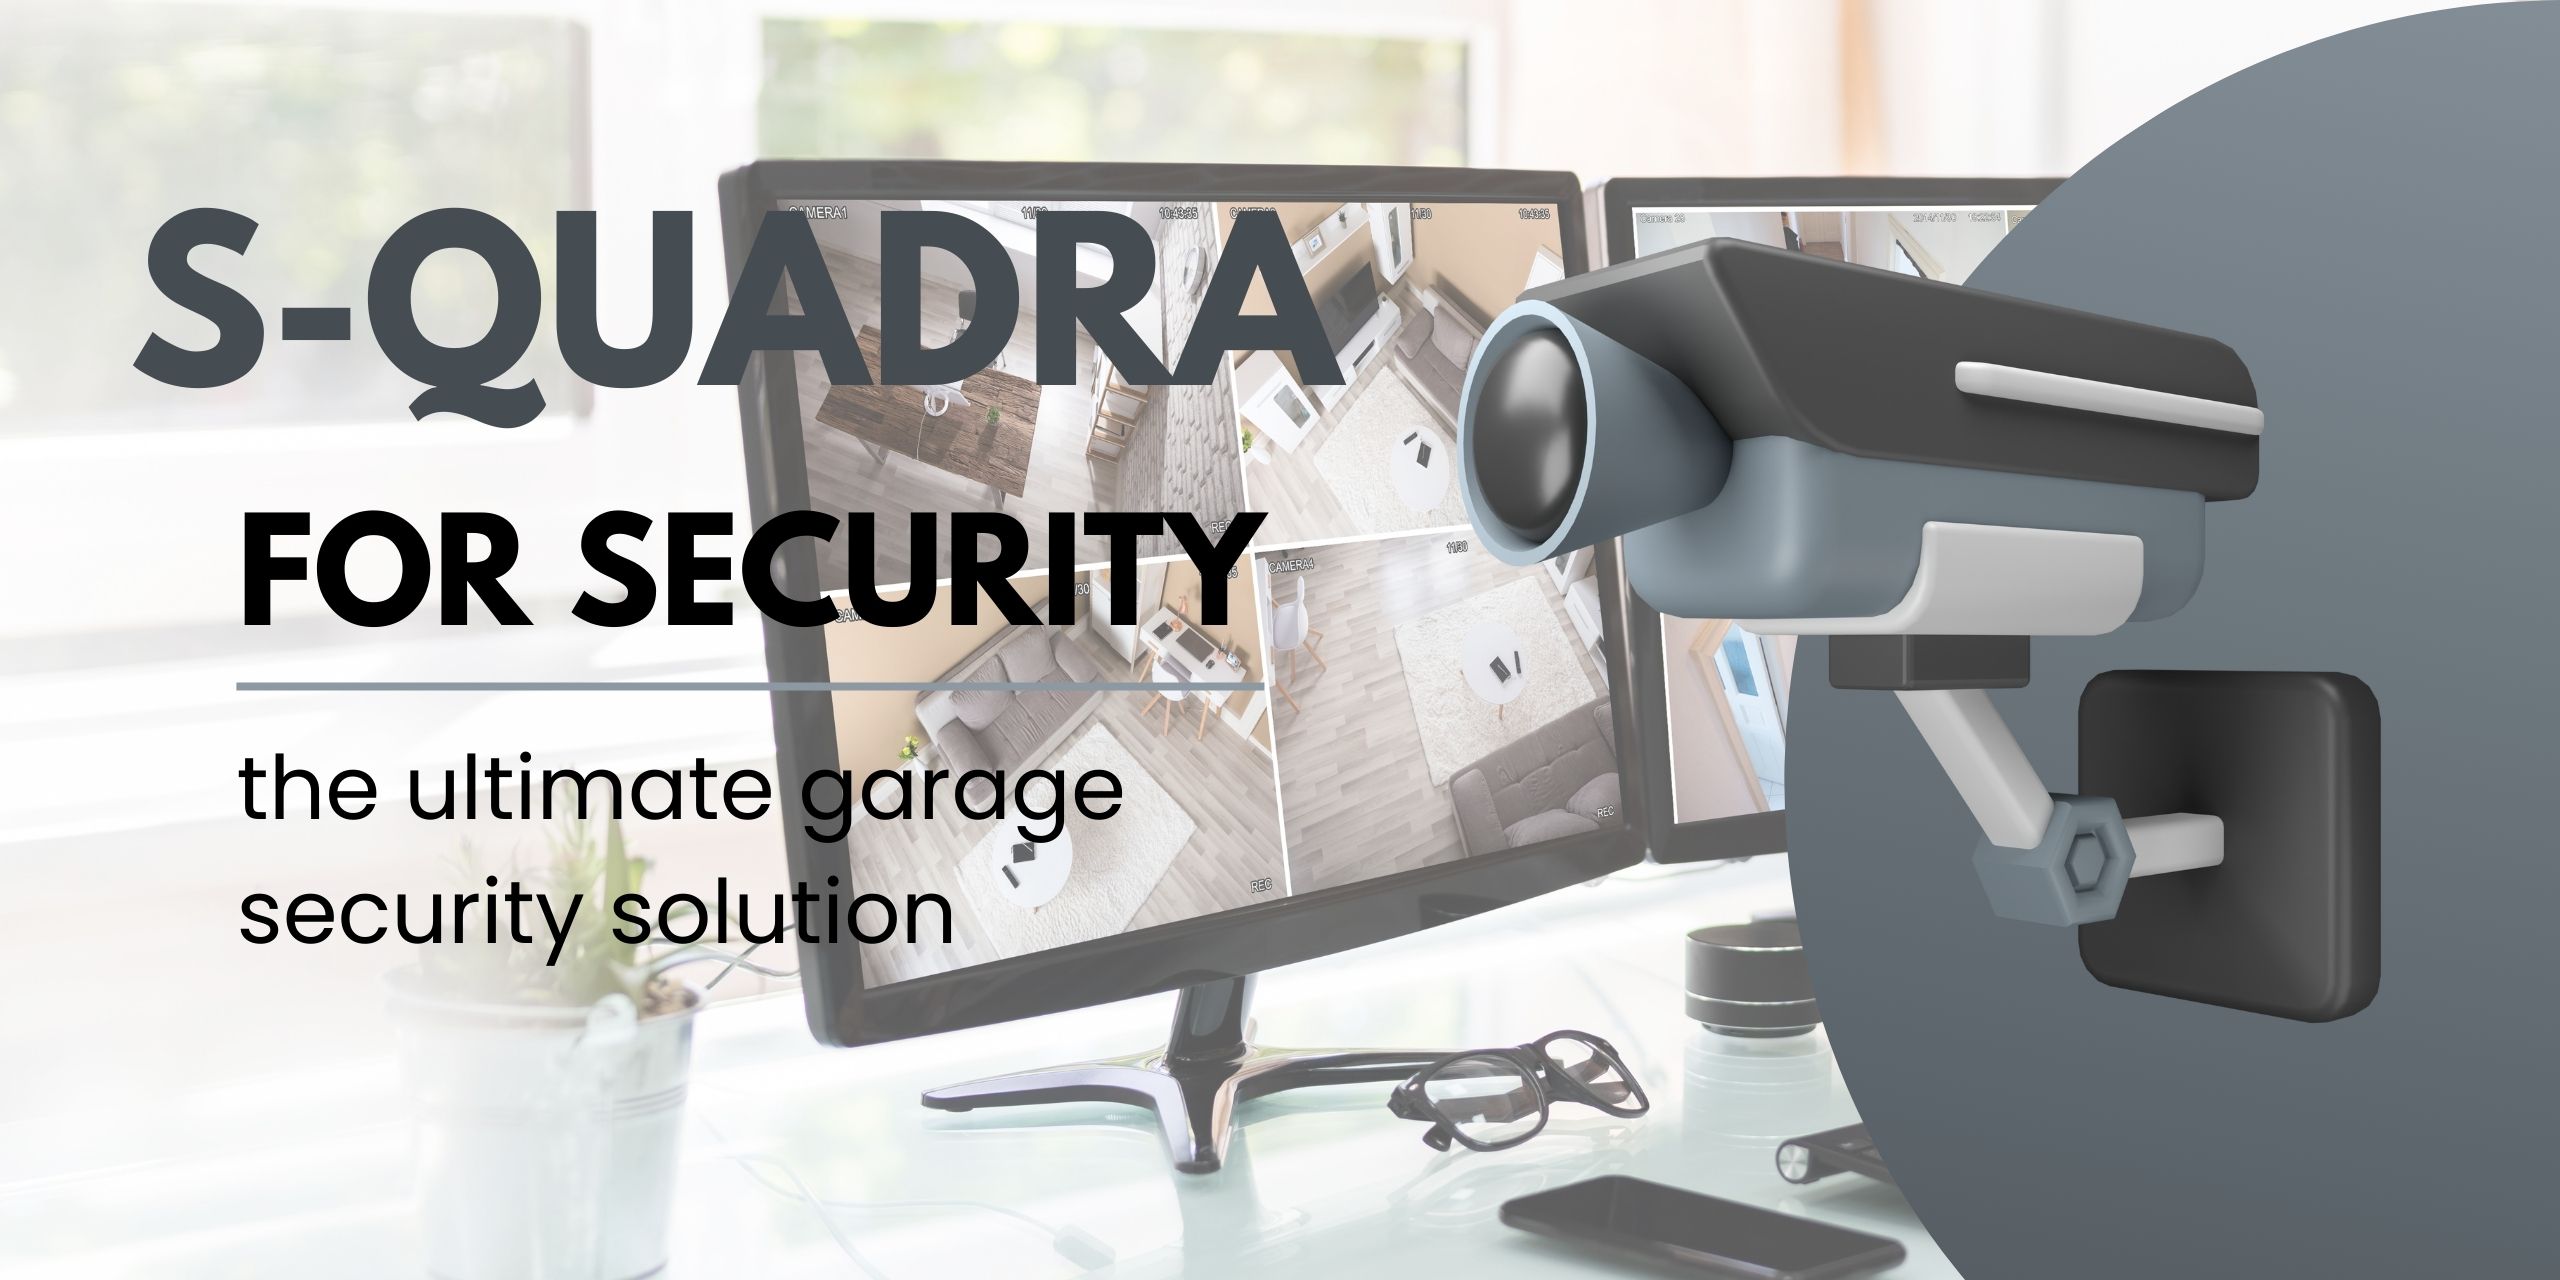 S-Quadra Helps You Keep Your Garage Door and Home Secure During Repairs